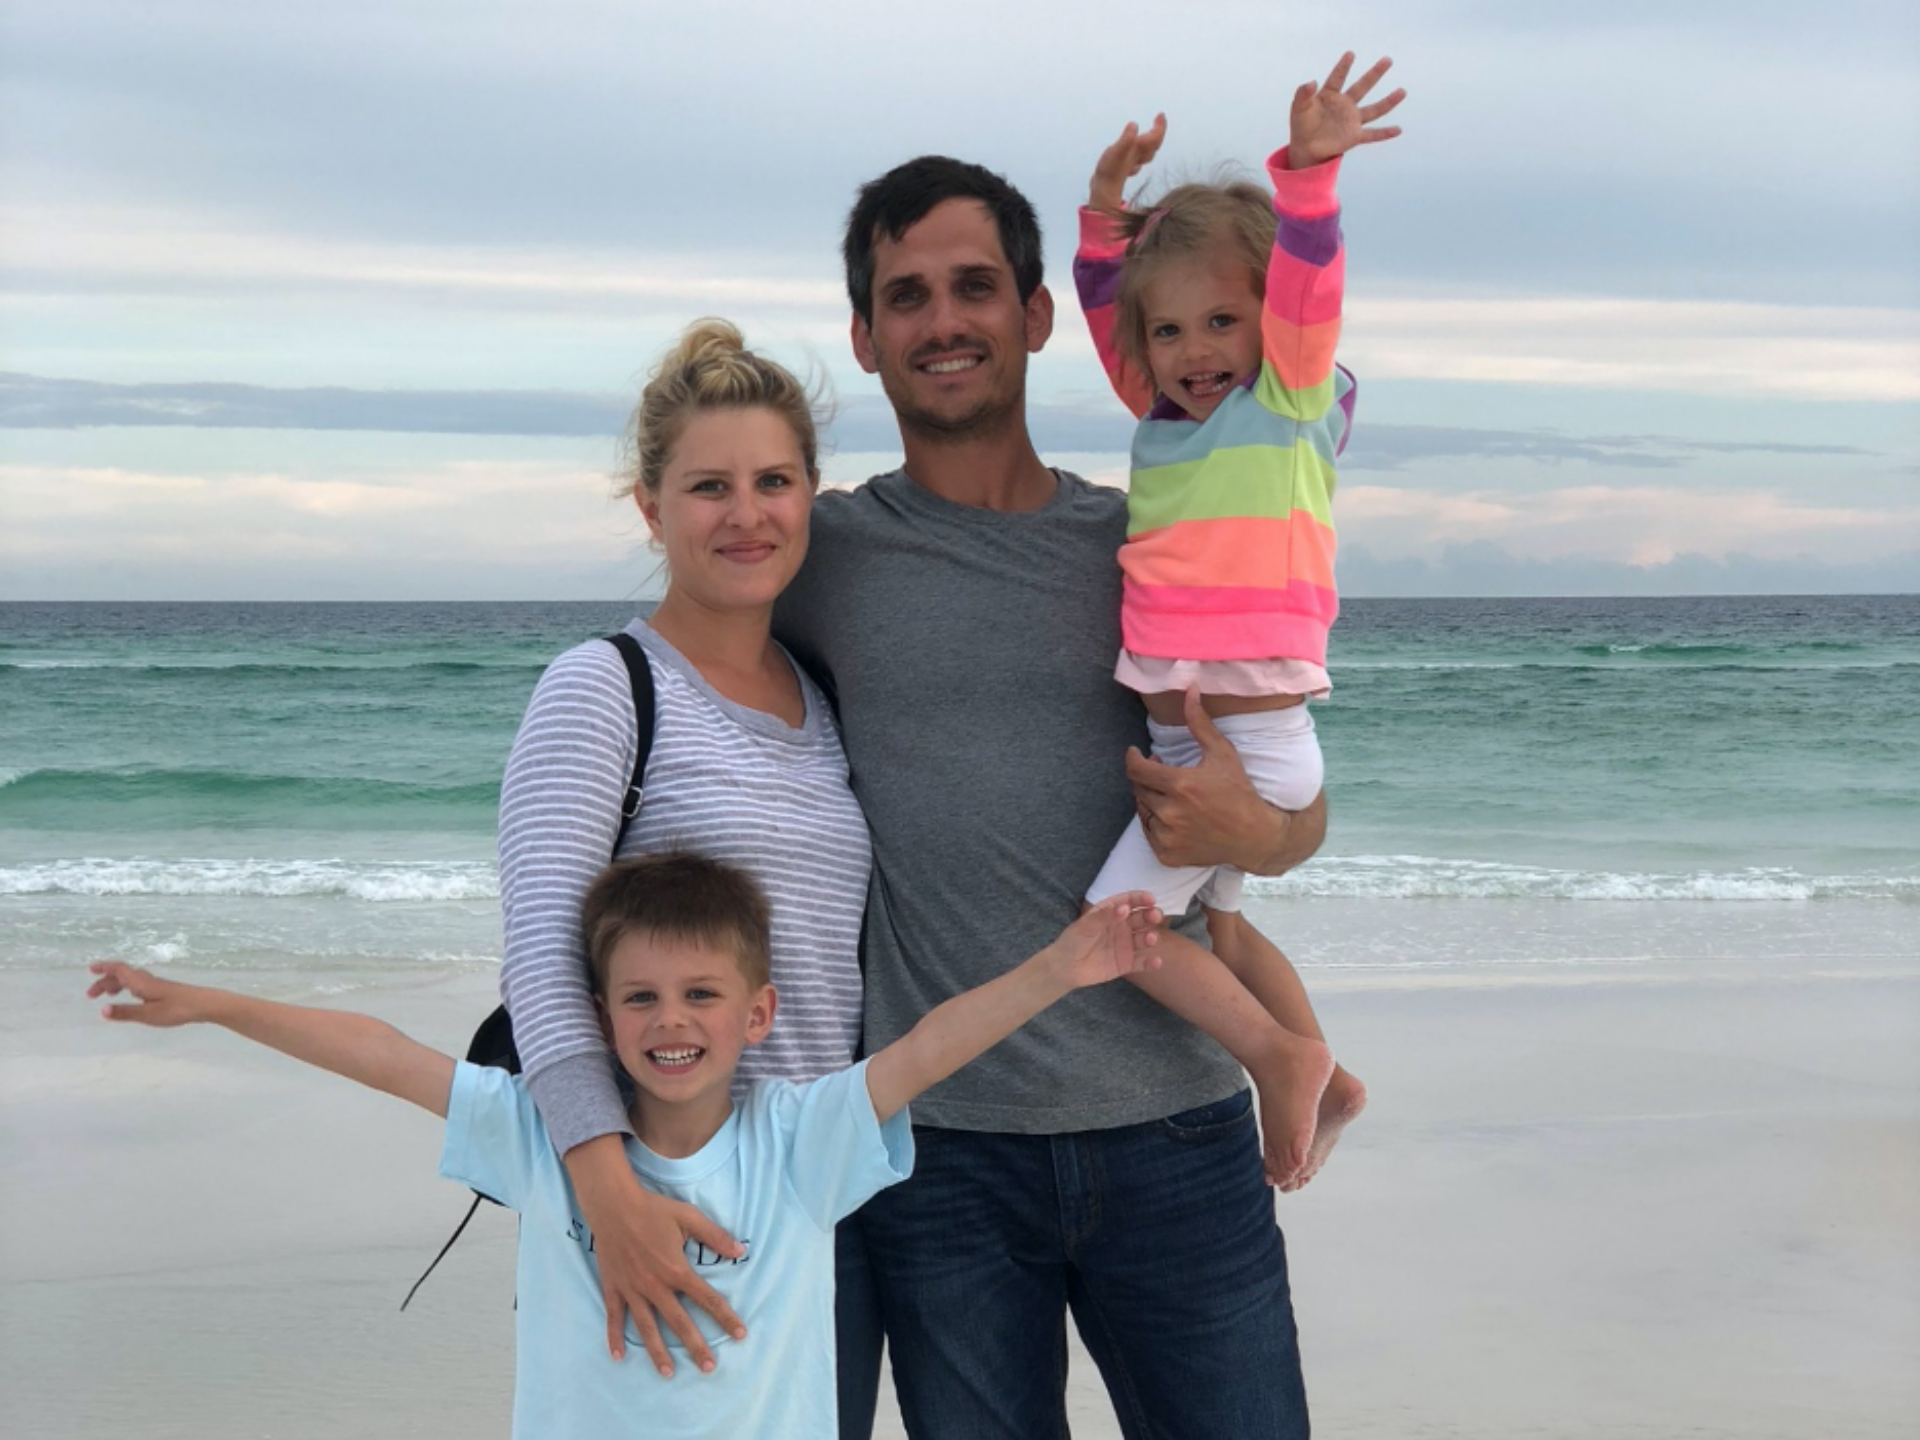 Emily Bamesberger pictured with her husband and two kids at the beach